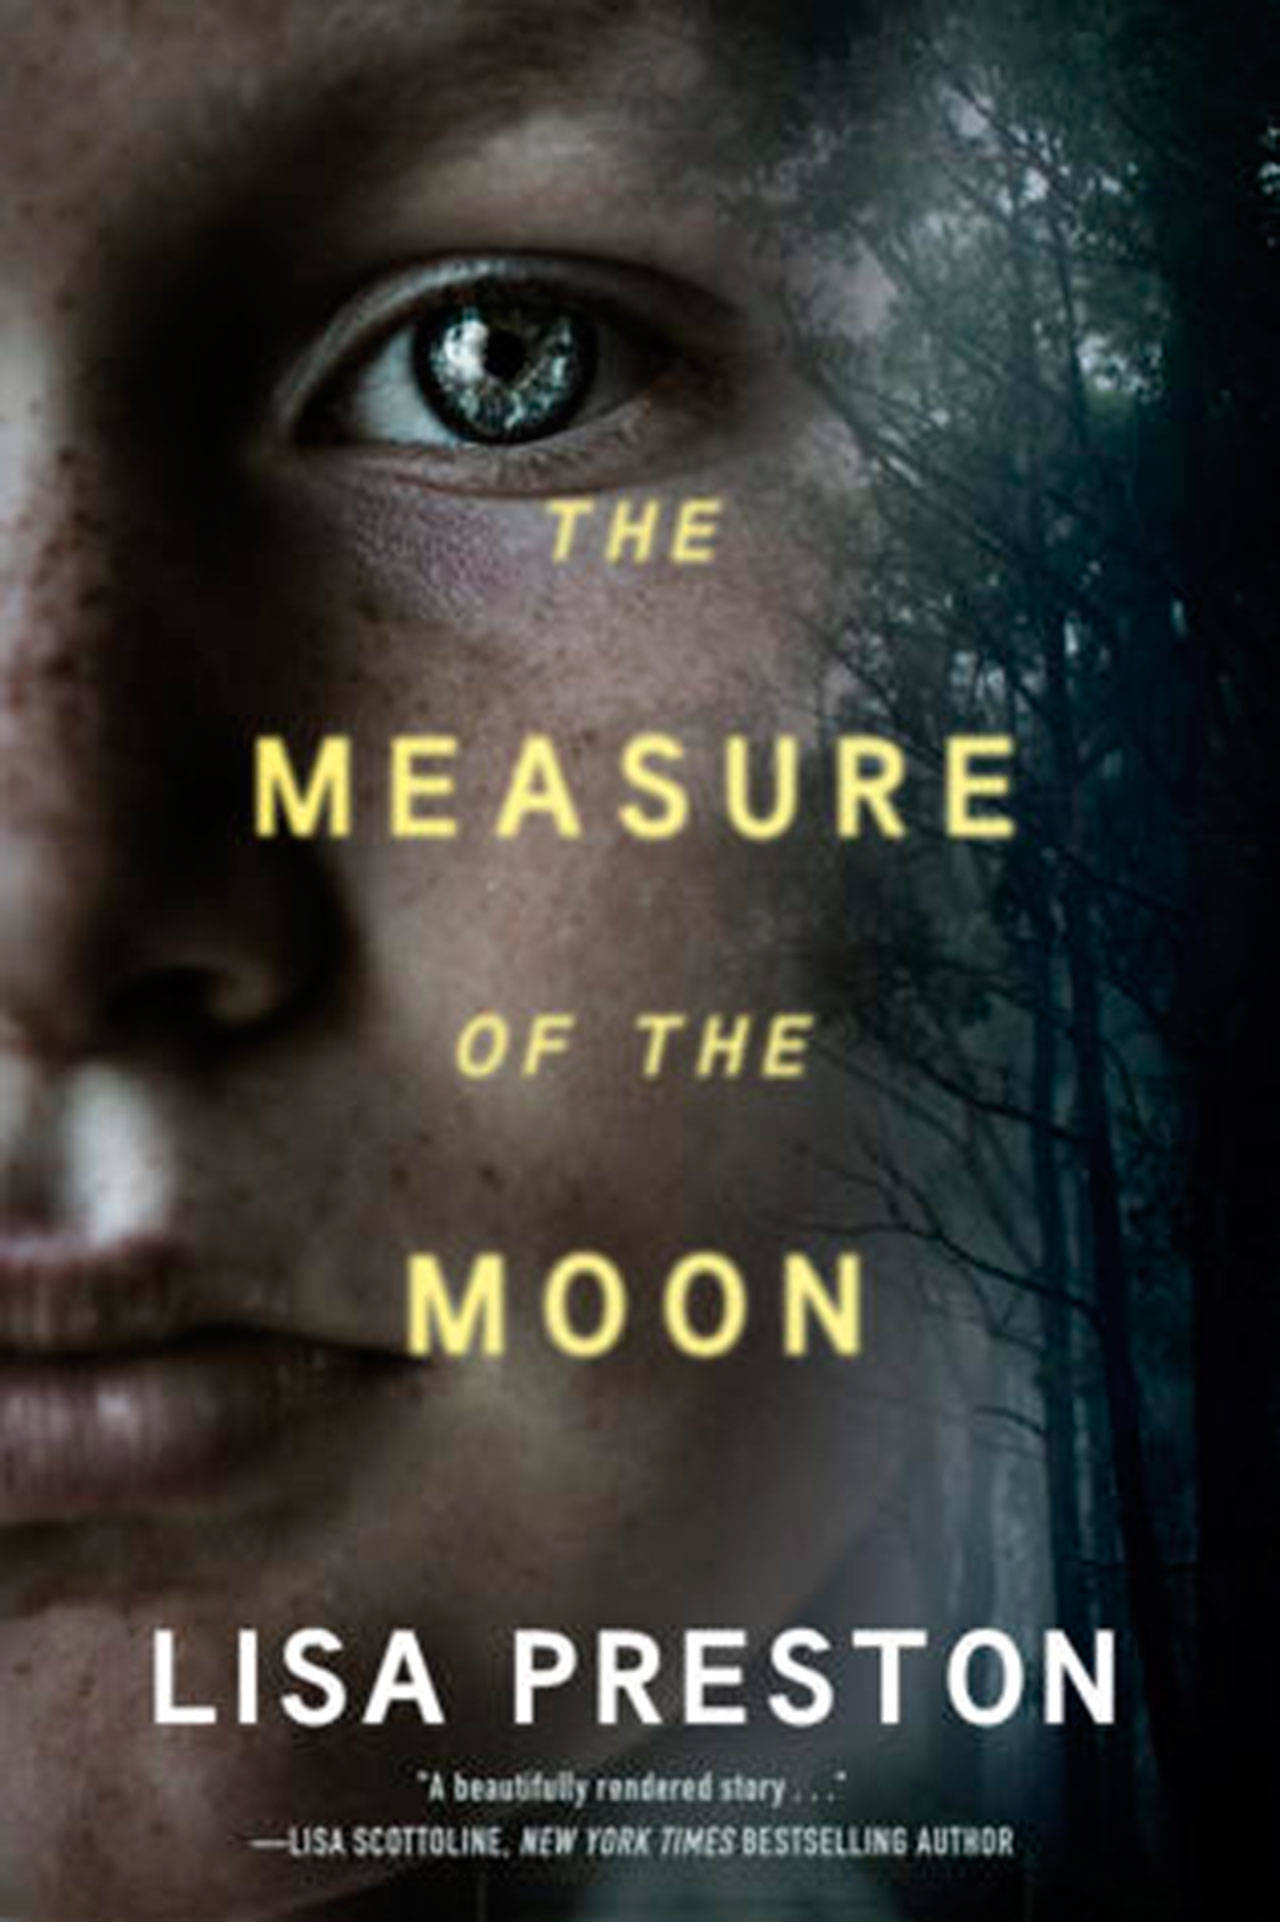 “The Measure of the Moon” came out April 18 through Thomas & Mercer, Amazon Publishing’s mystery, crime and true crime imprint.